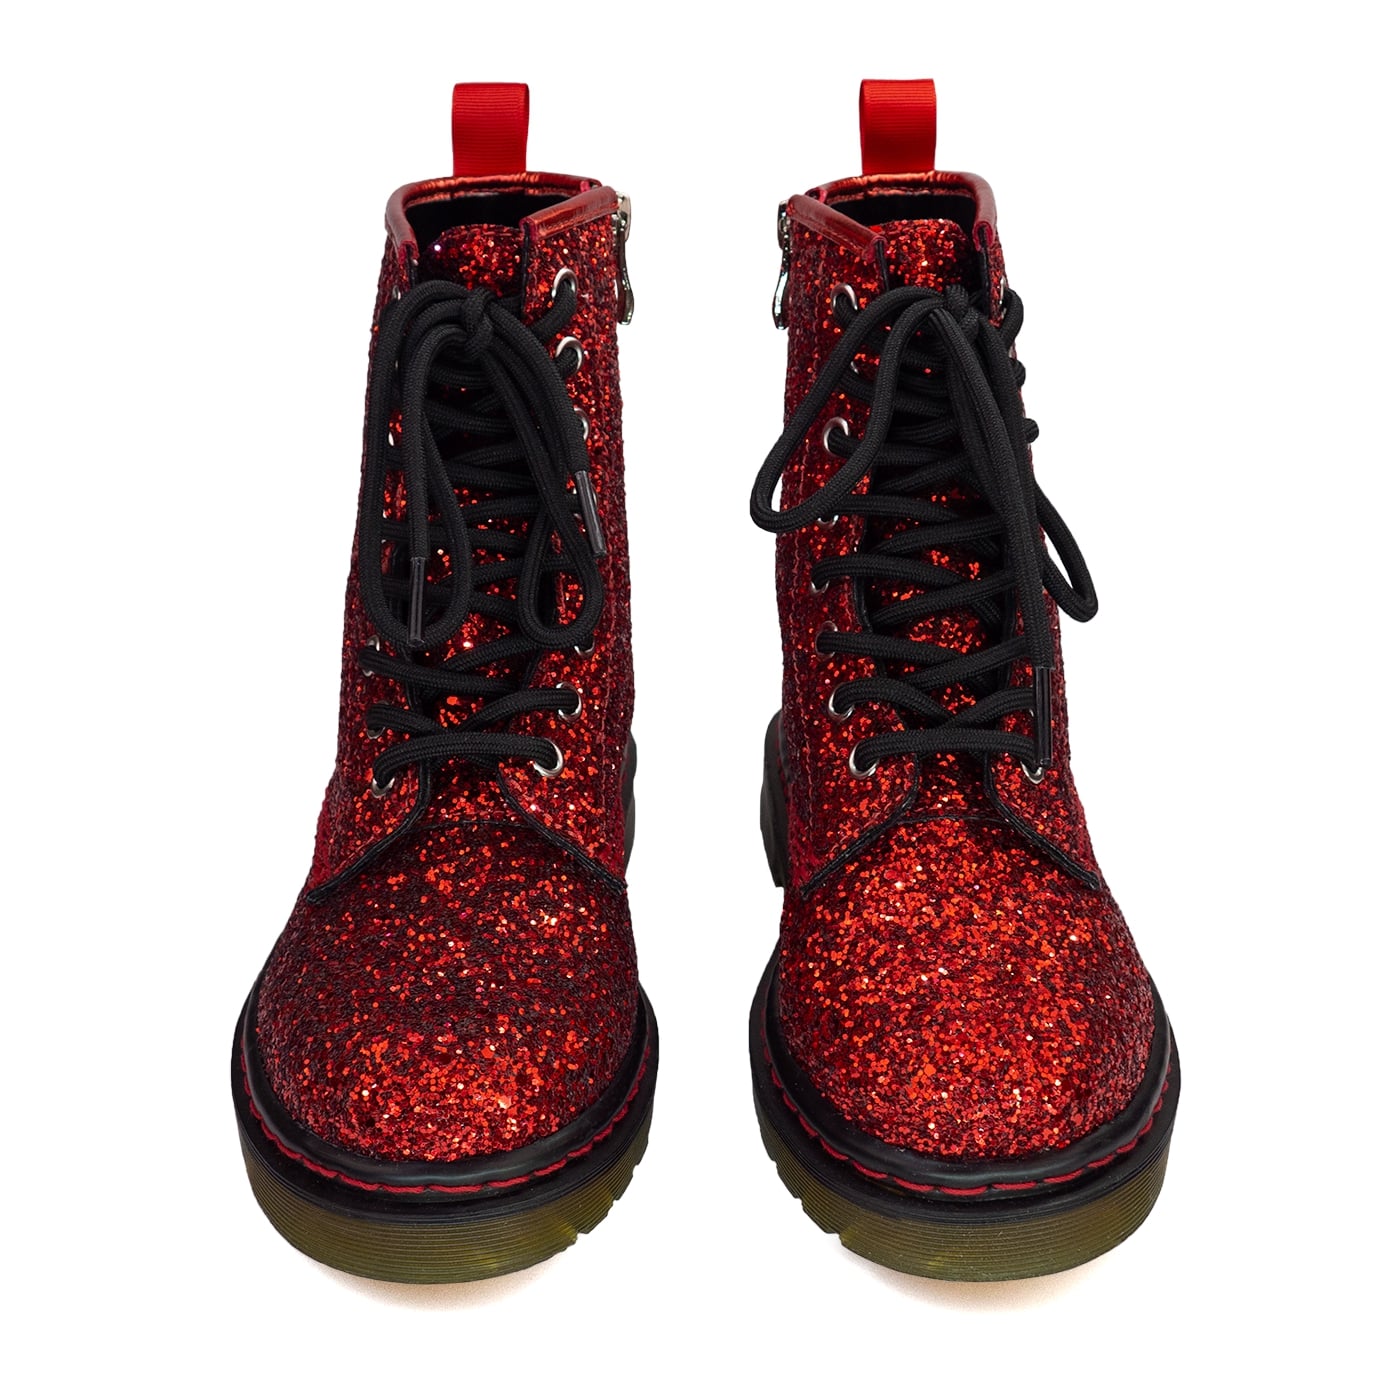 Dorothy Wonder Boots by RainbowsAndFairies.com.au (Red Glitter - Wizard Of Oz - Metallic - Glitter Boots - Combat Boots - Side Zip Boot - Sparkle) - SKU: FW_WONDR_DRTHY_ORG - Pic-02